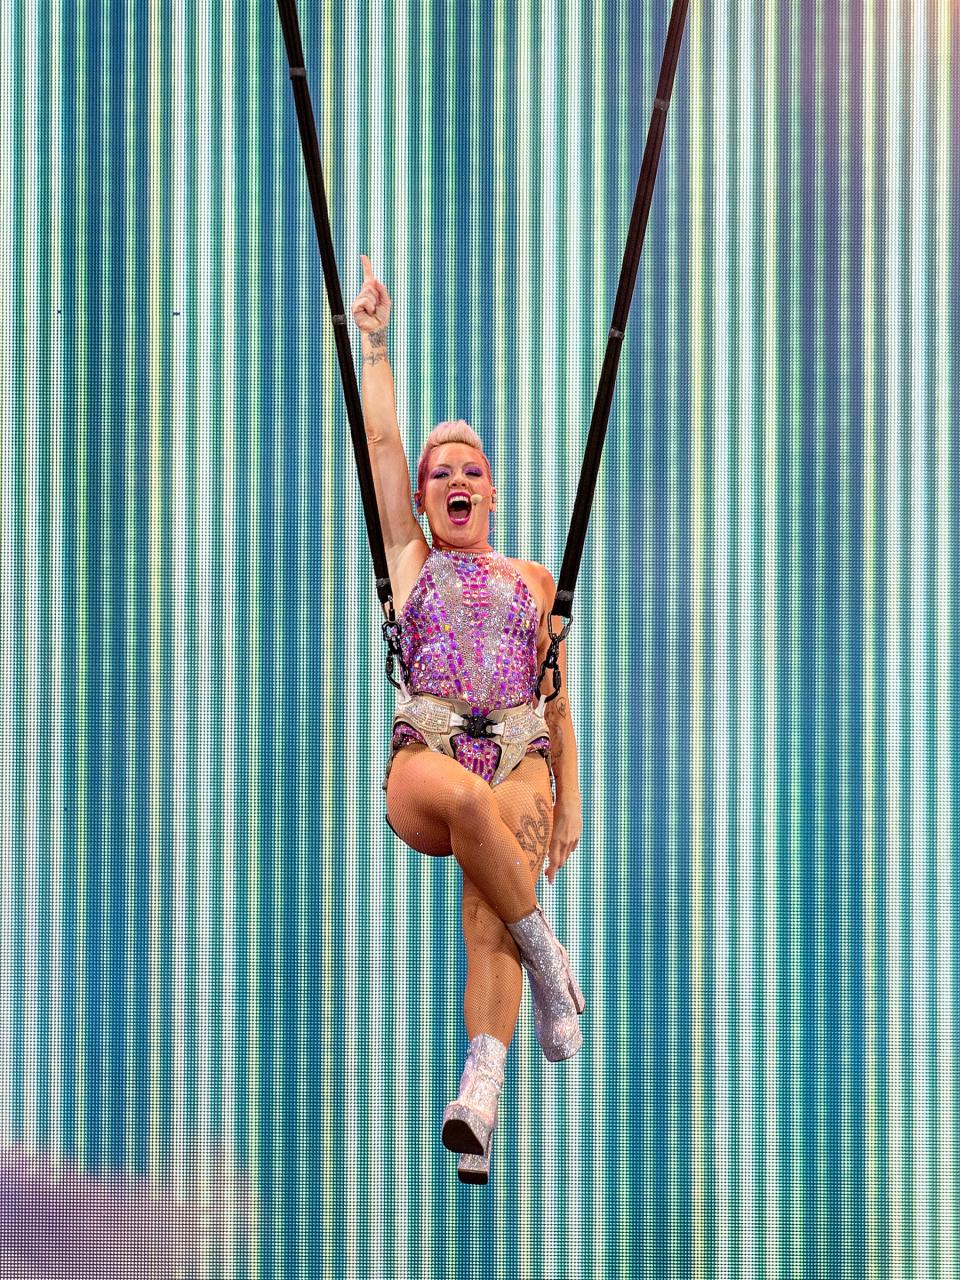 Pink singing during a mid-air plunge at PNC Park.